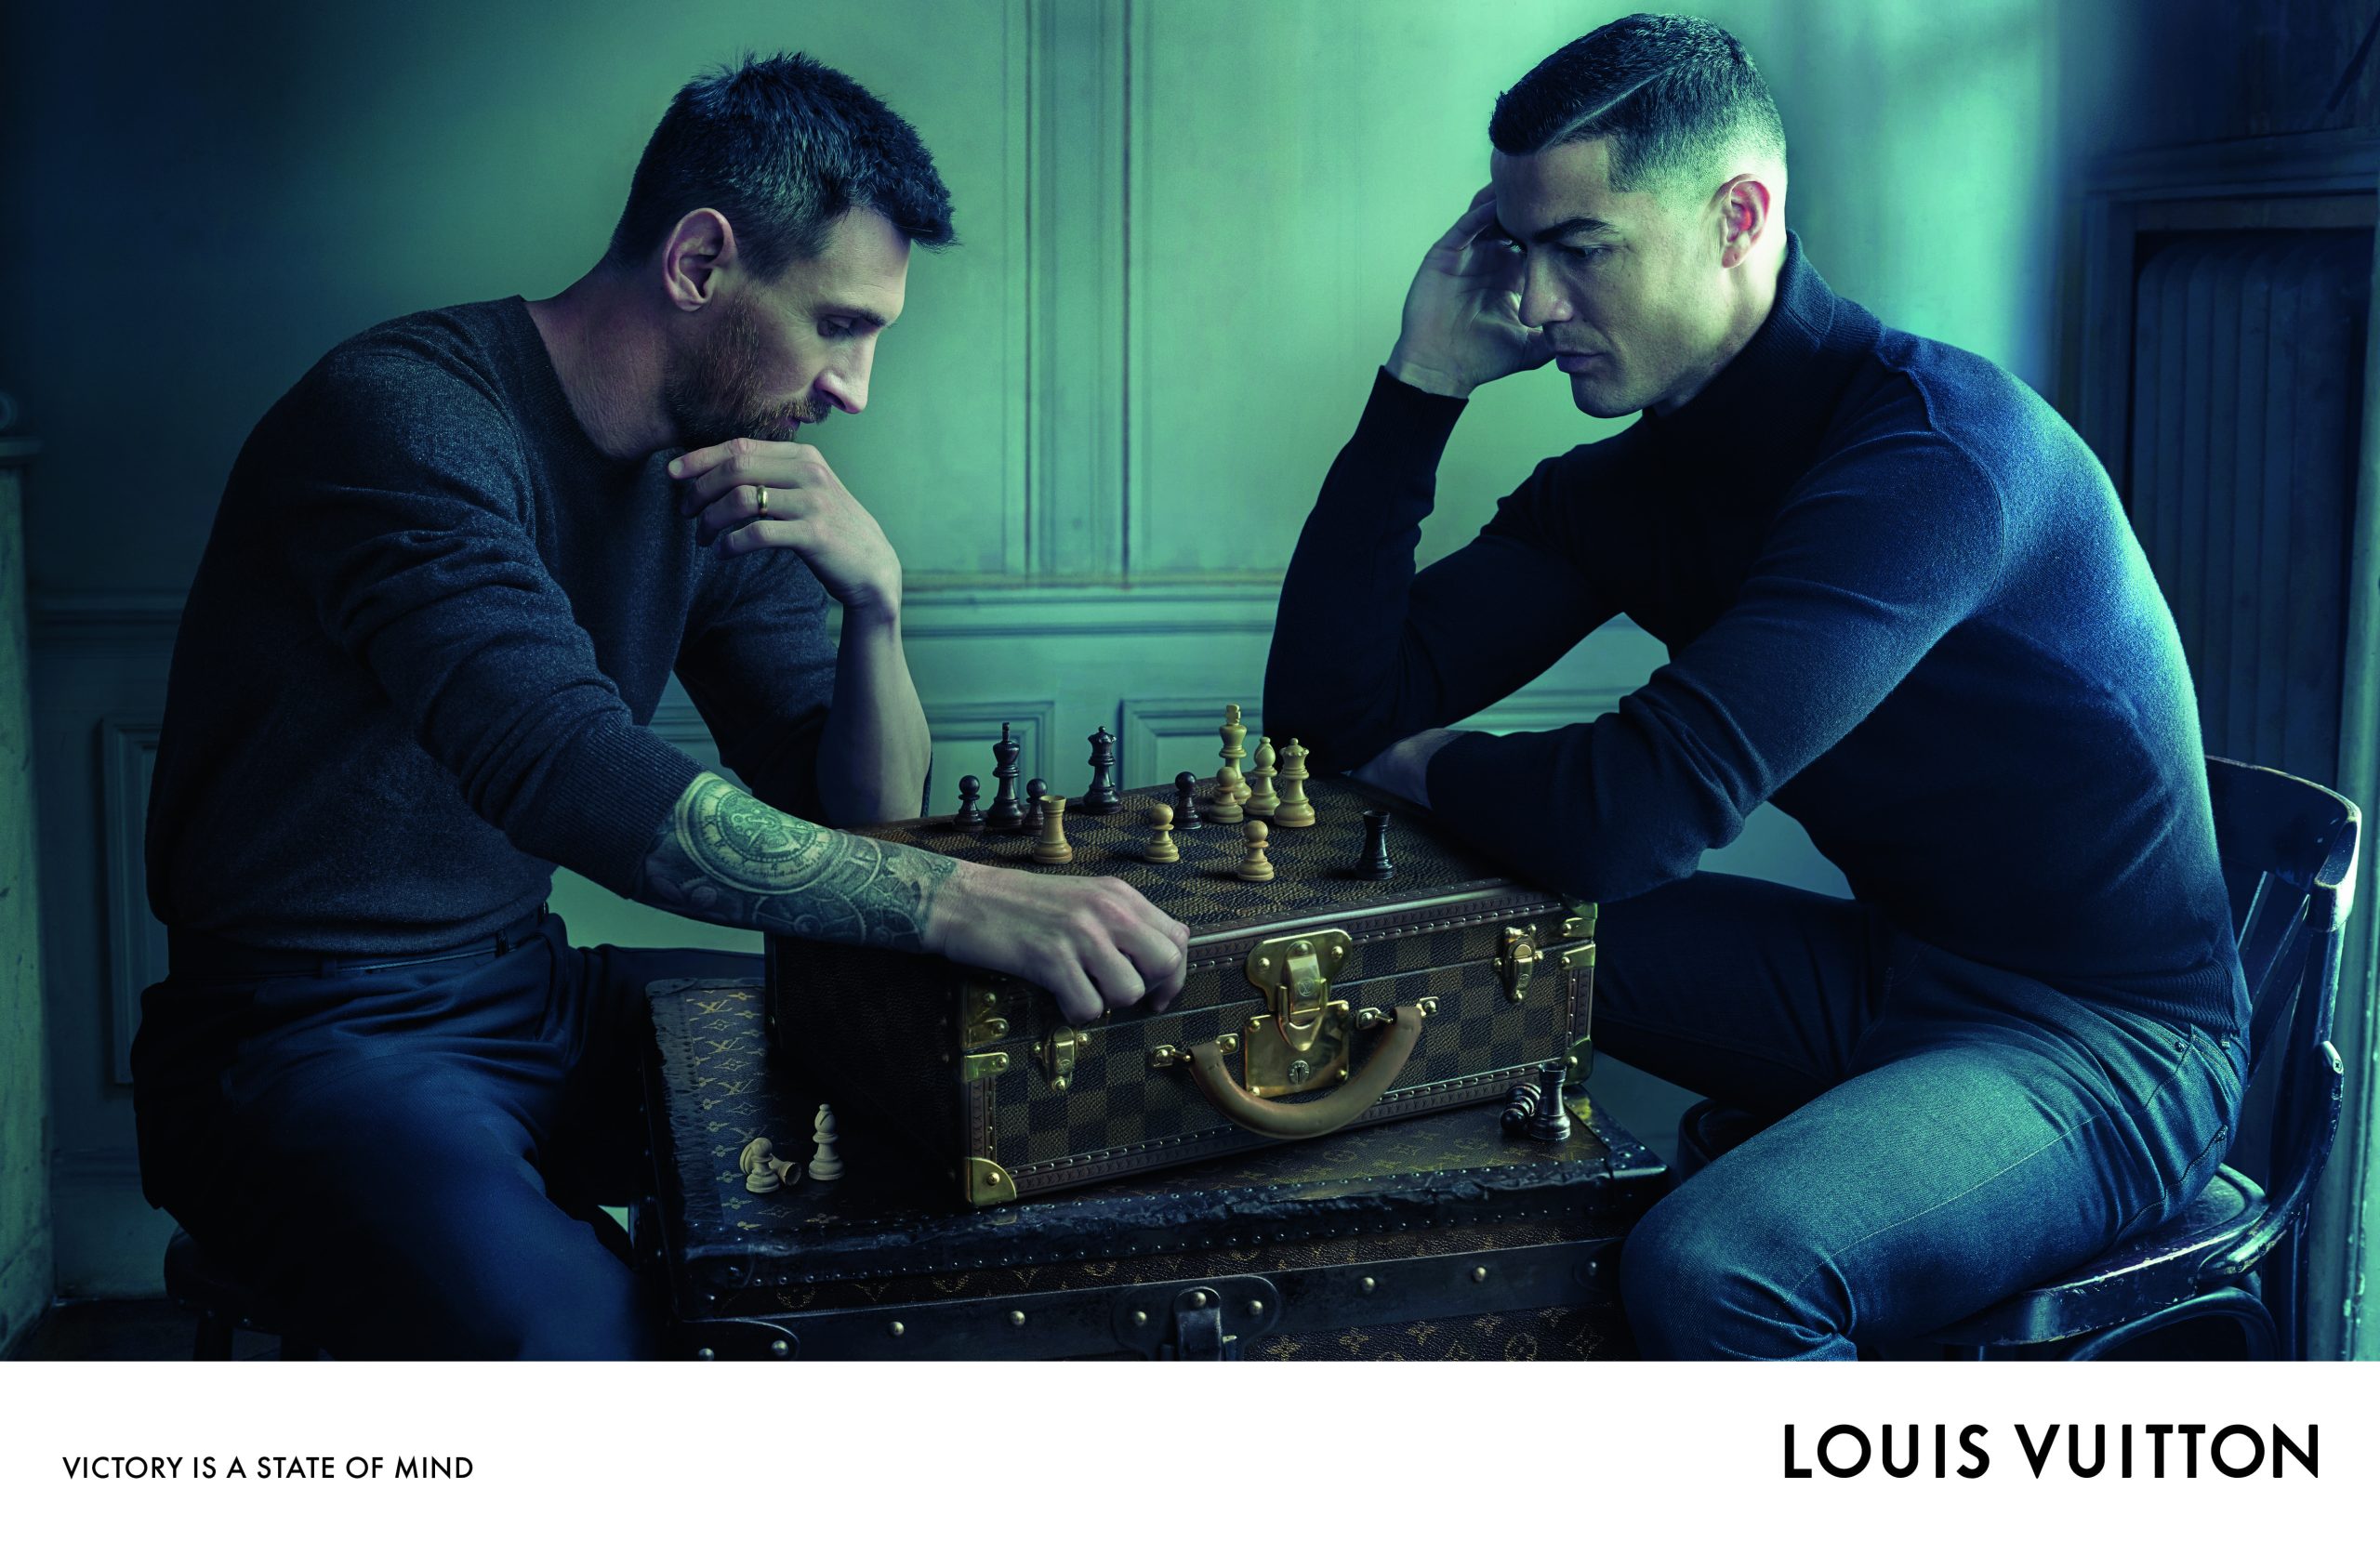 Louis Vuitton 'Victory is a State of Mind' 2022 Ad Campaign Review